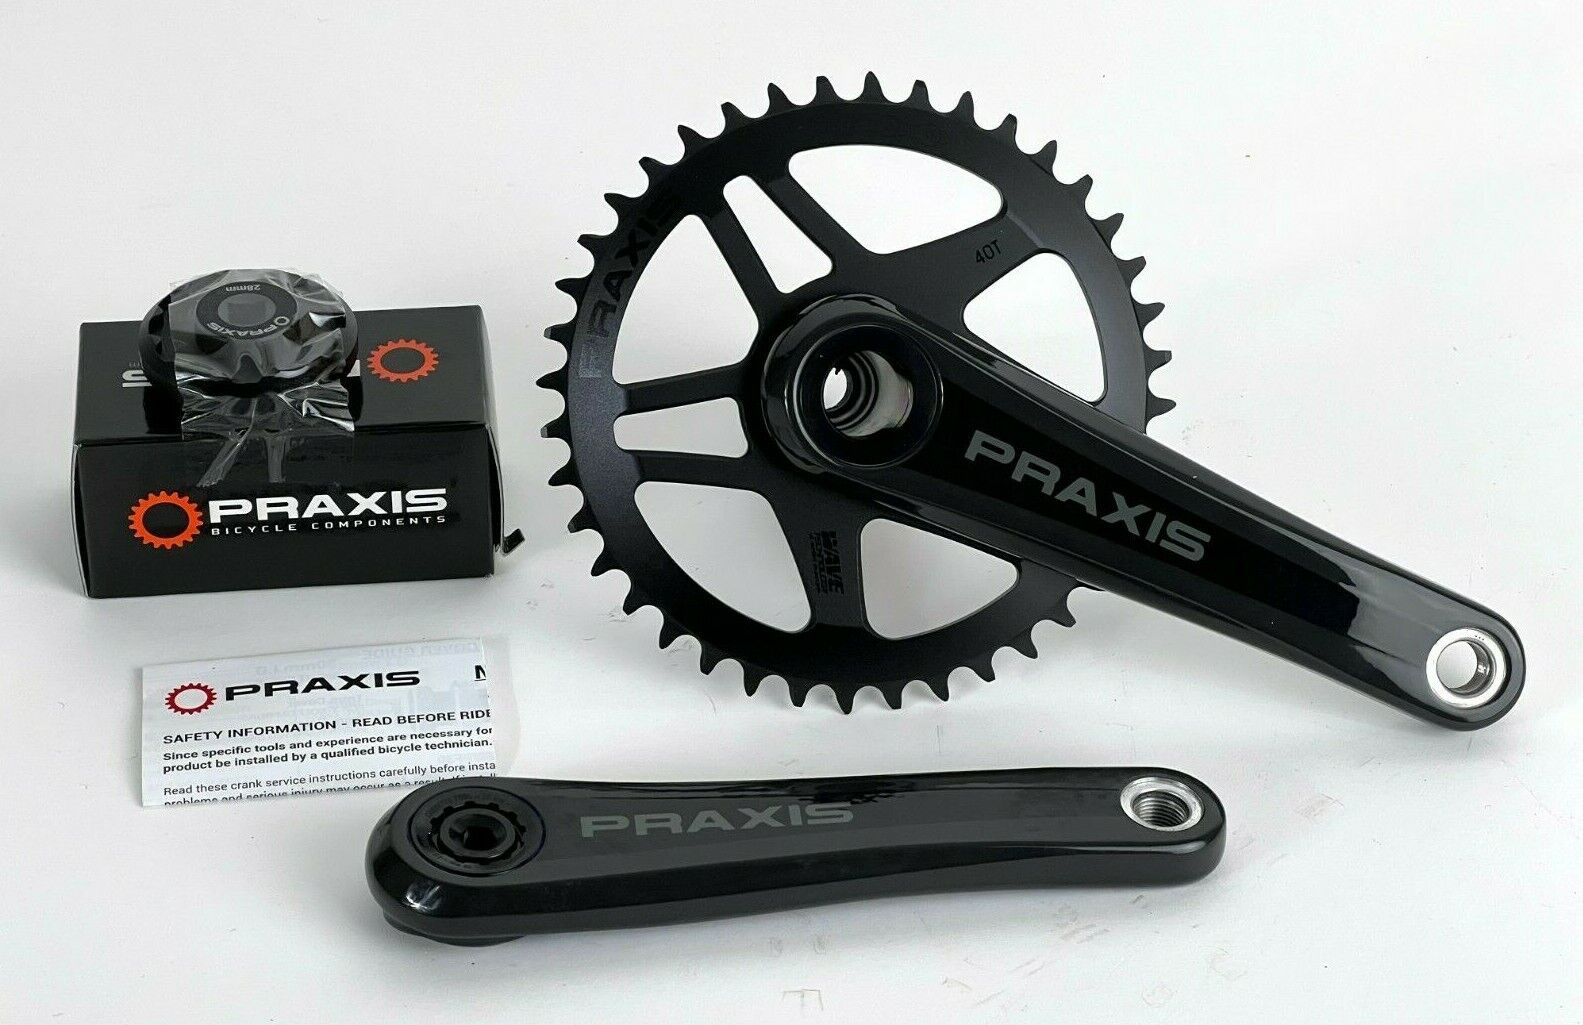 NEW before selling ☆ Praxis Zayante Carbon Choice Gravel 1X Crankset 68 73mm 40t 170mm BB w